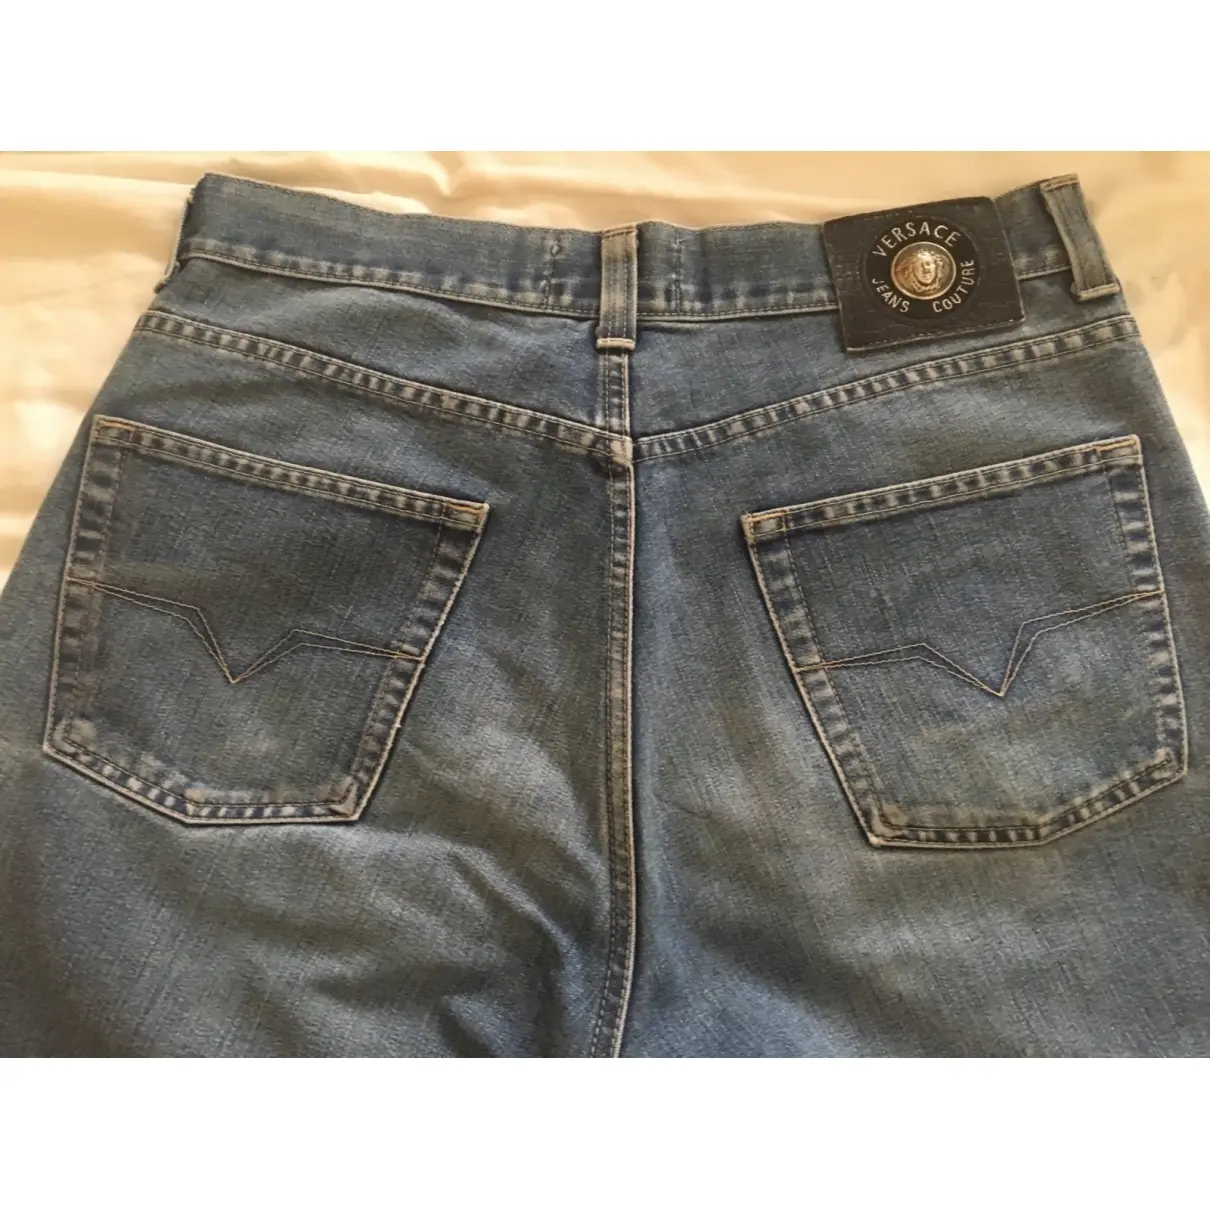 Versace Jeans Couture Straight jeans for sale - Vintage